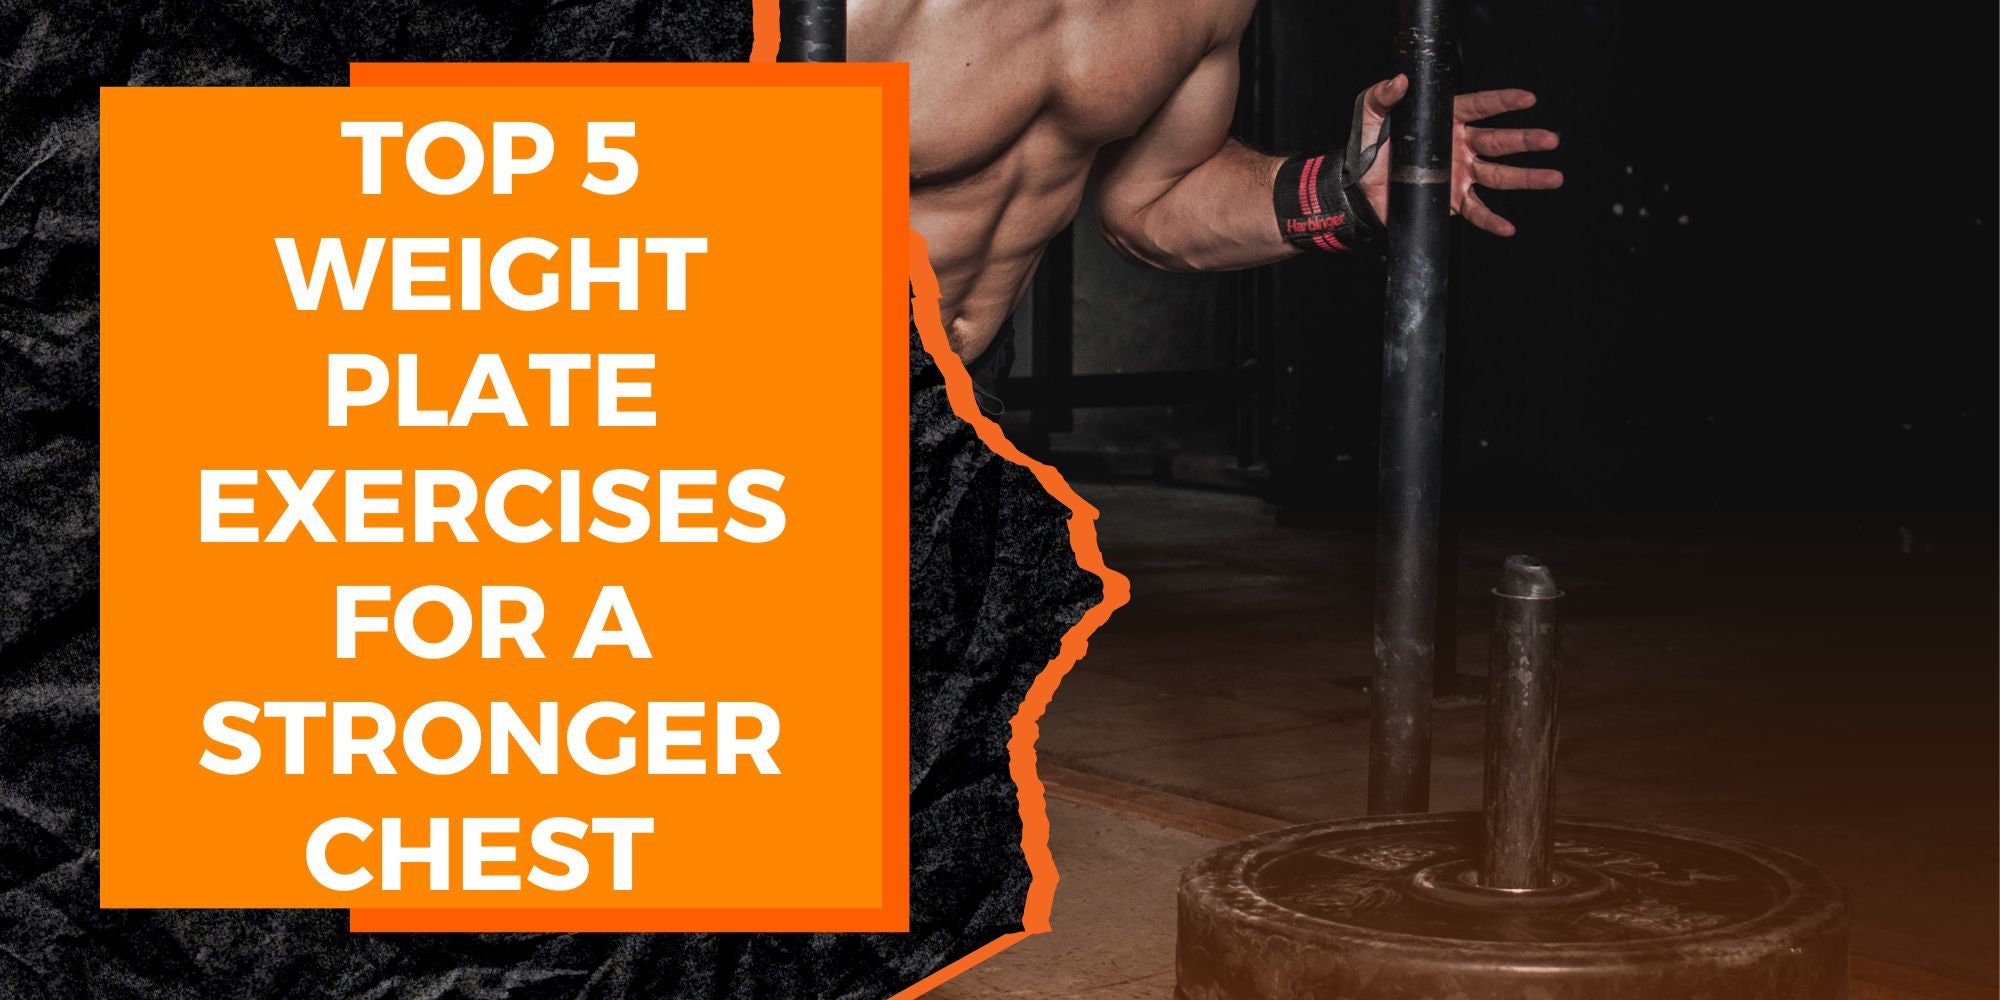 Top 5 Weight Plate Exercises for a Stronger Chest